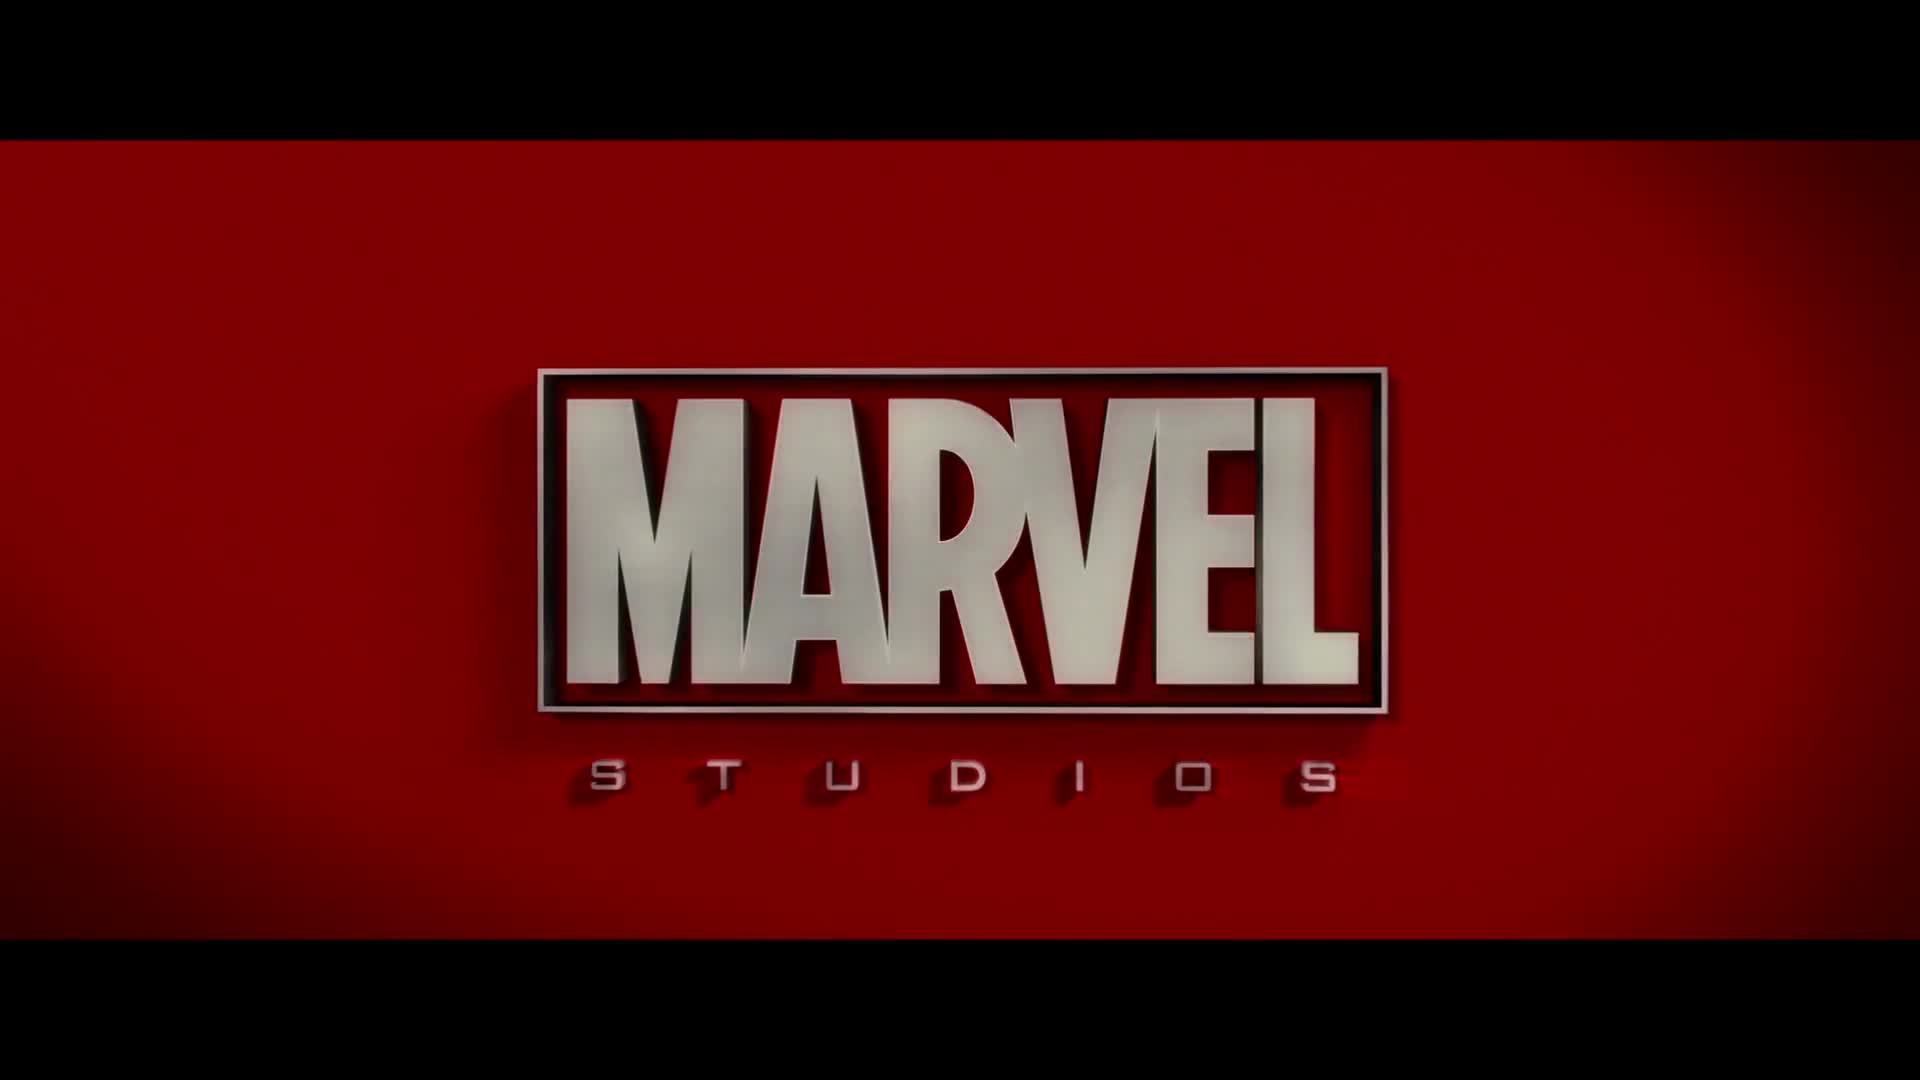 Captain America: The Winter Soldier - Blu-ray and Digital HD Trailer